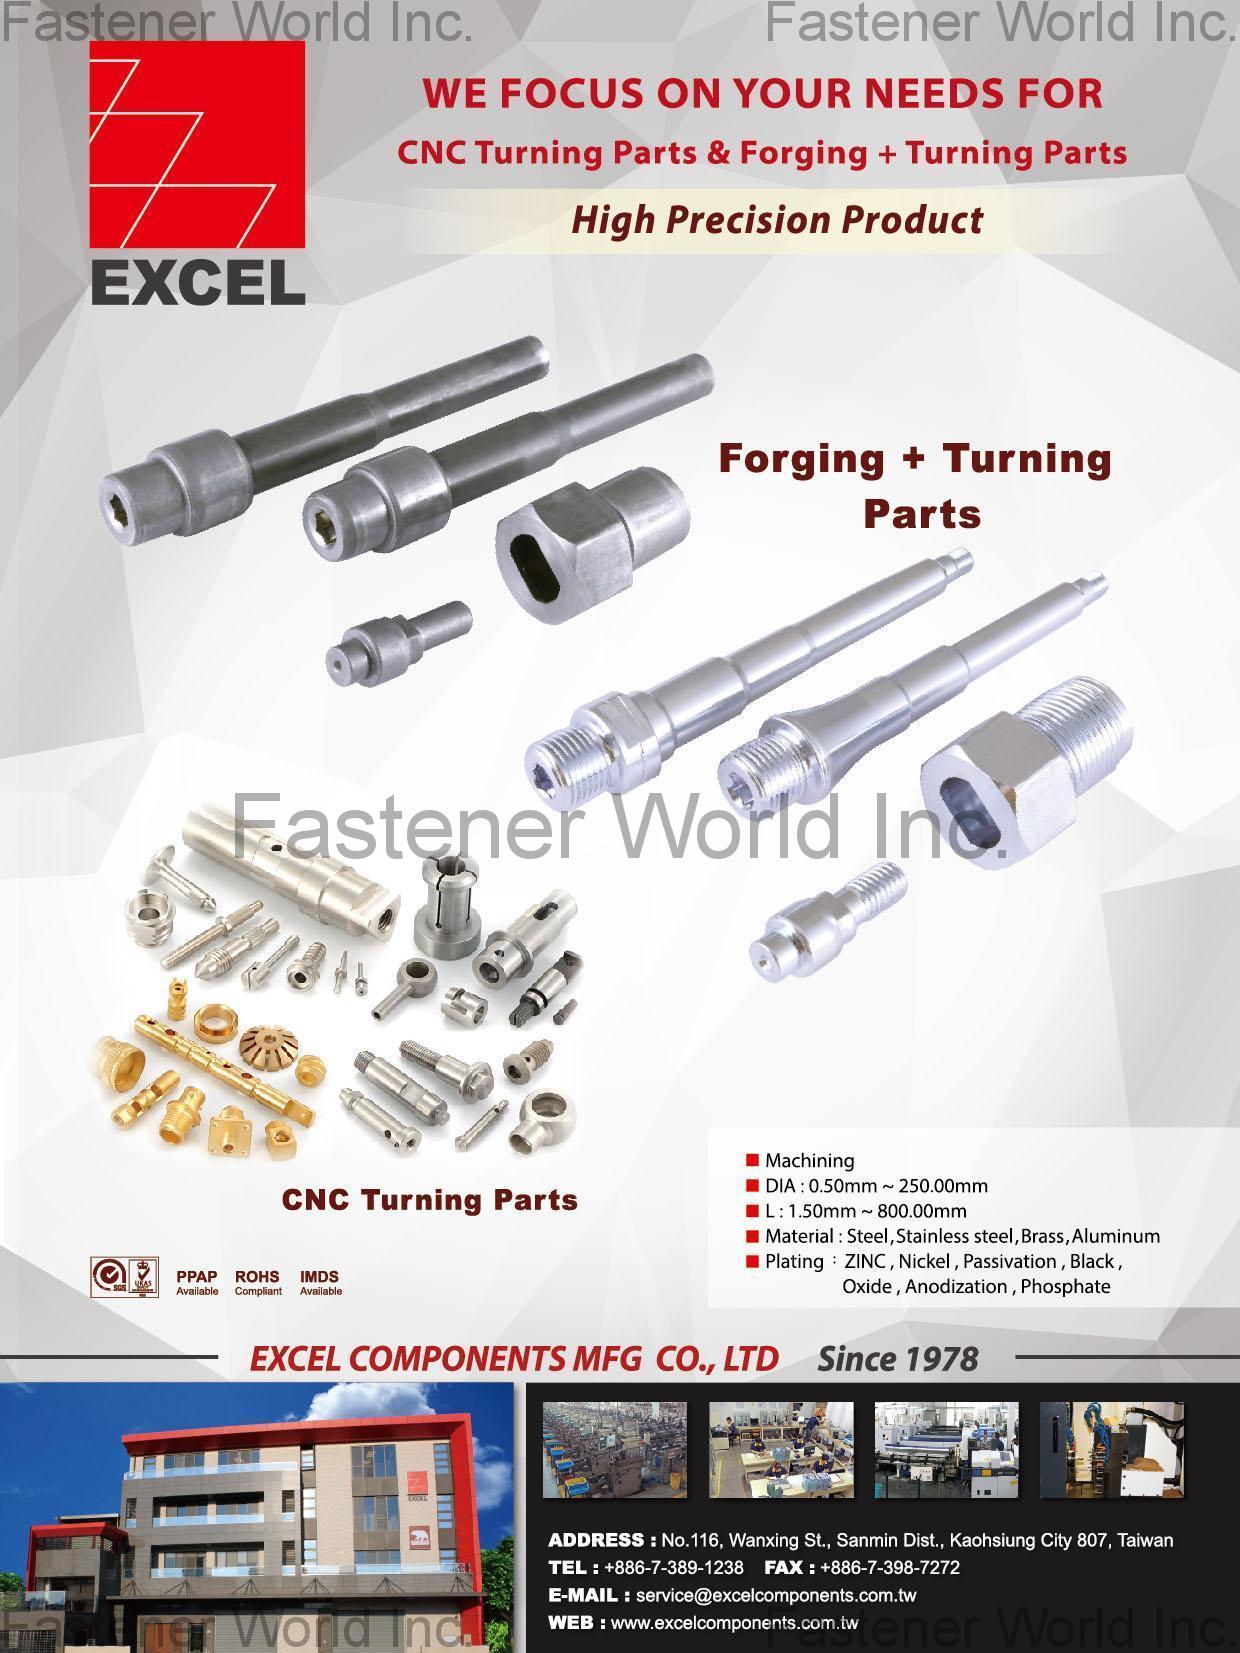 EXCEL COMPONENTS MFG. CO., LTD. , Forging + Turning Parts, CNC Turning Parts , Turning Parts